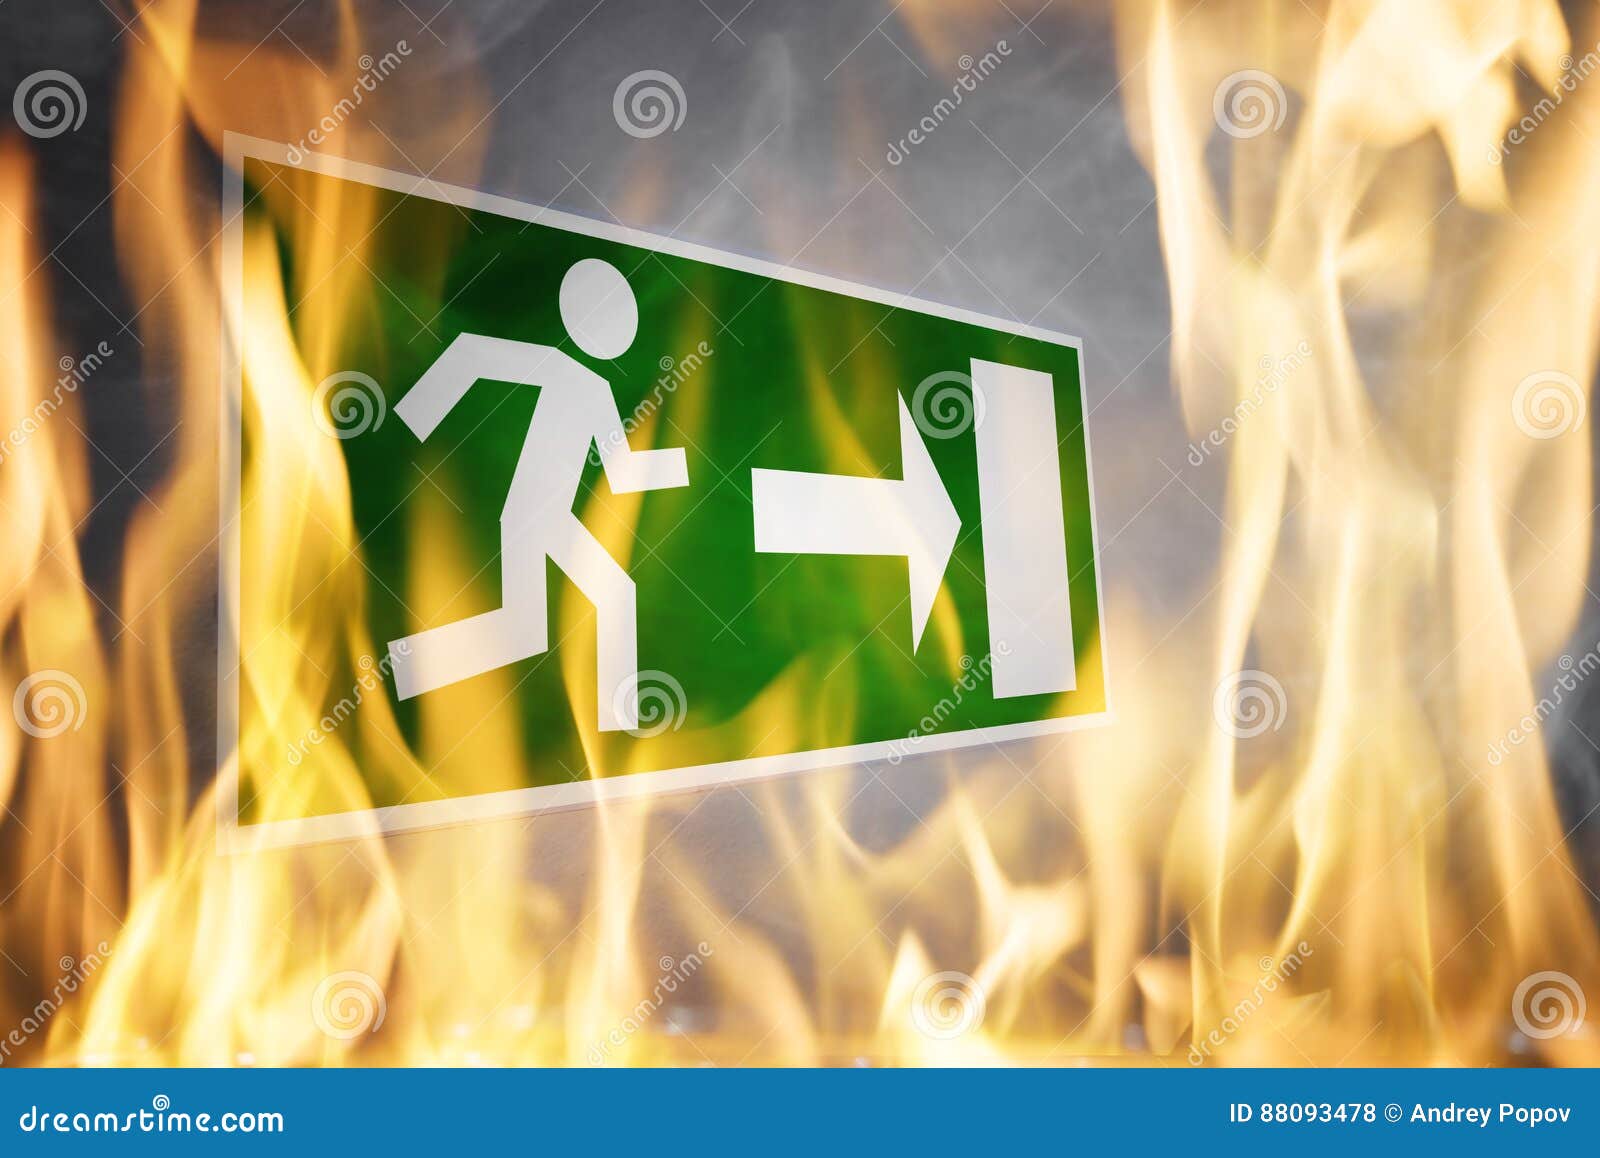 close-up of emergency fire exit board